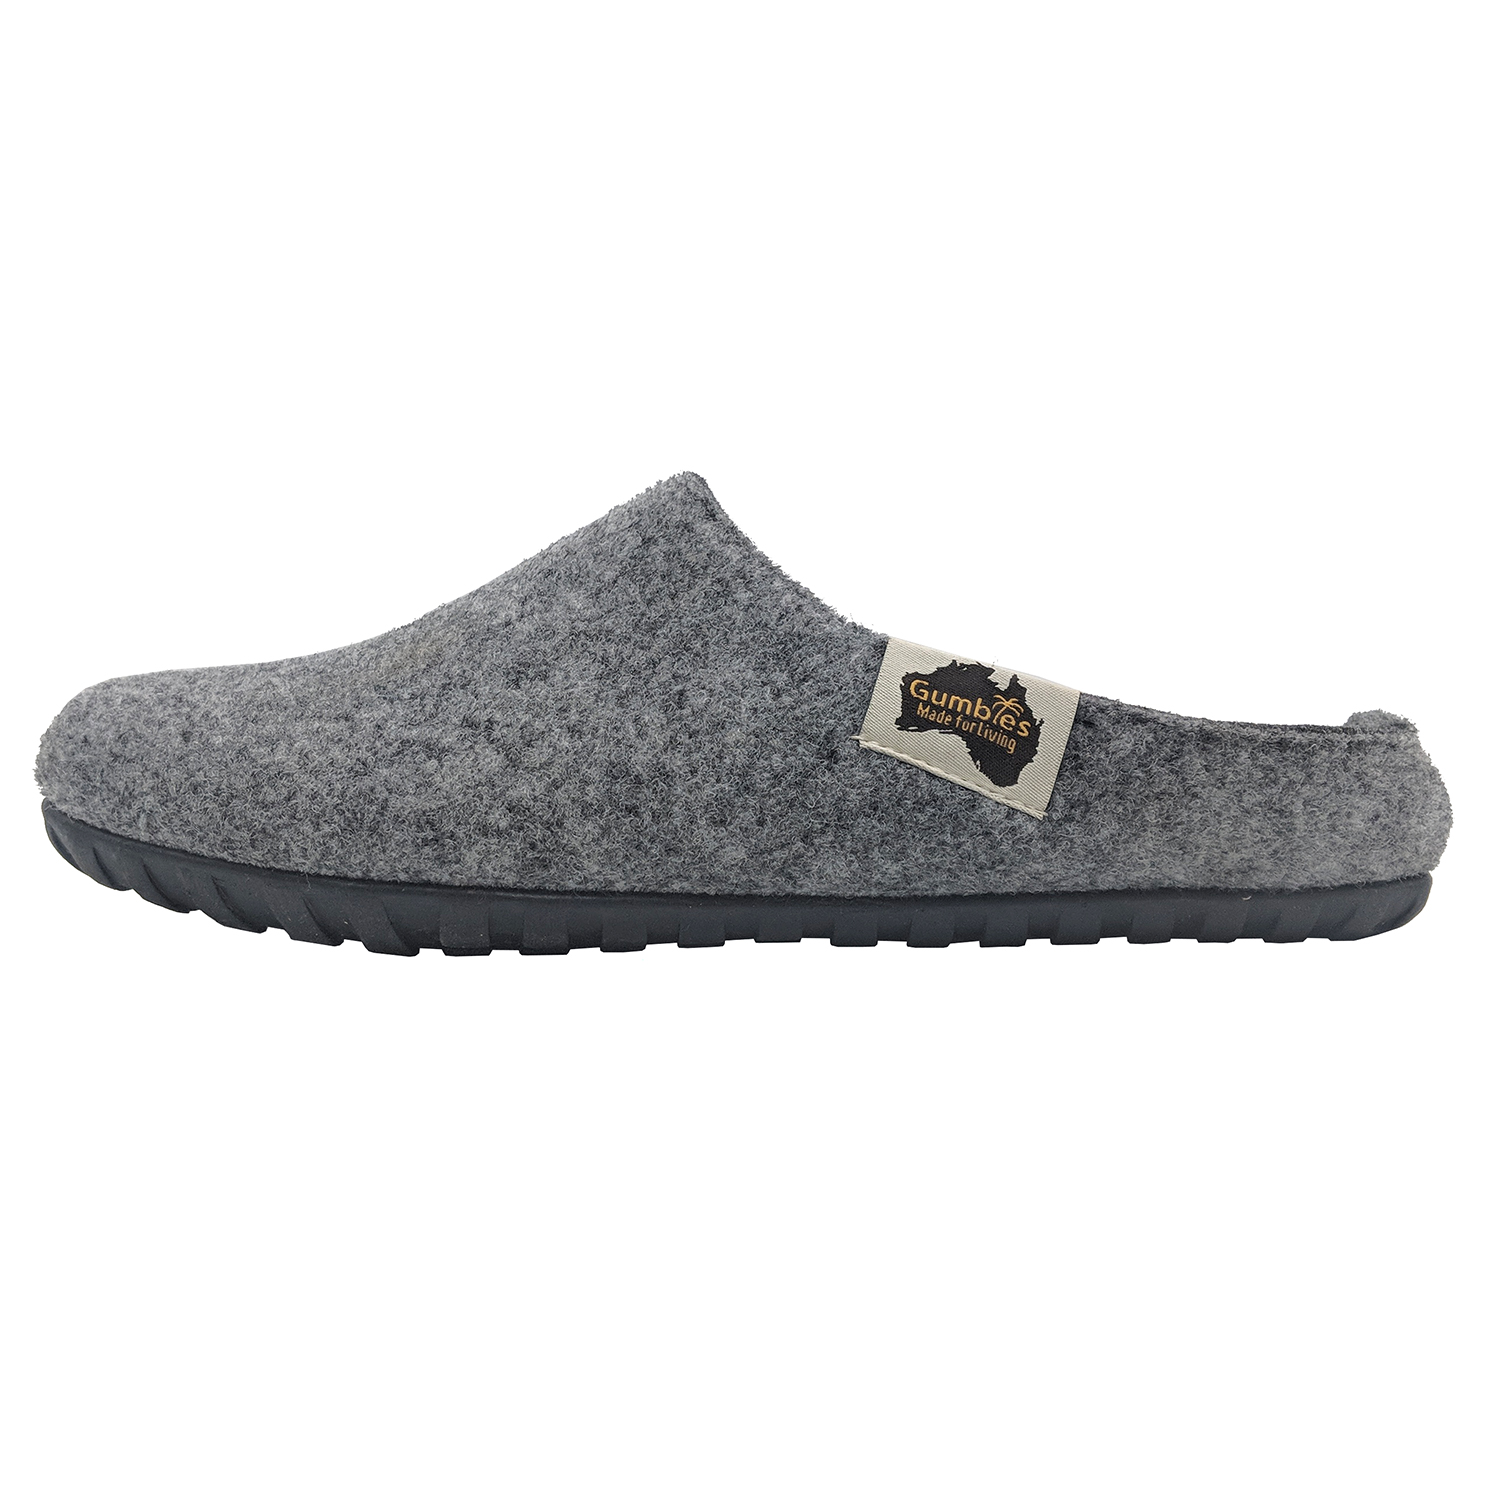 Gumbies Outback Hausschuh Grey-Charcoal